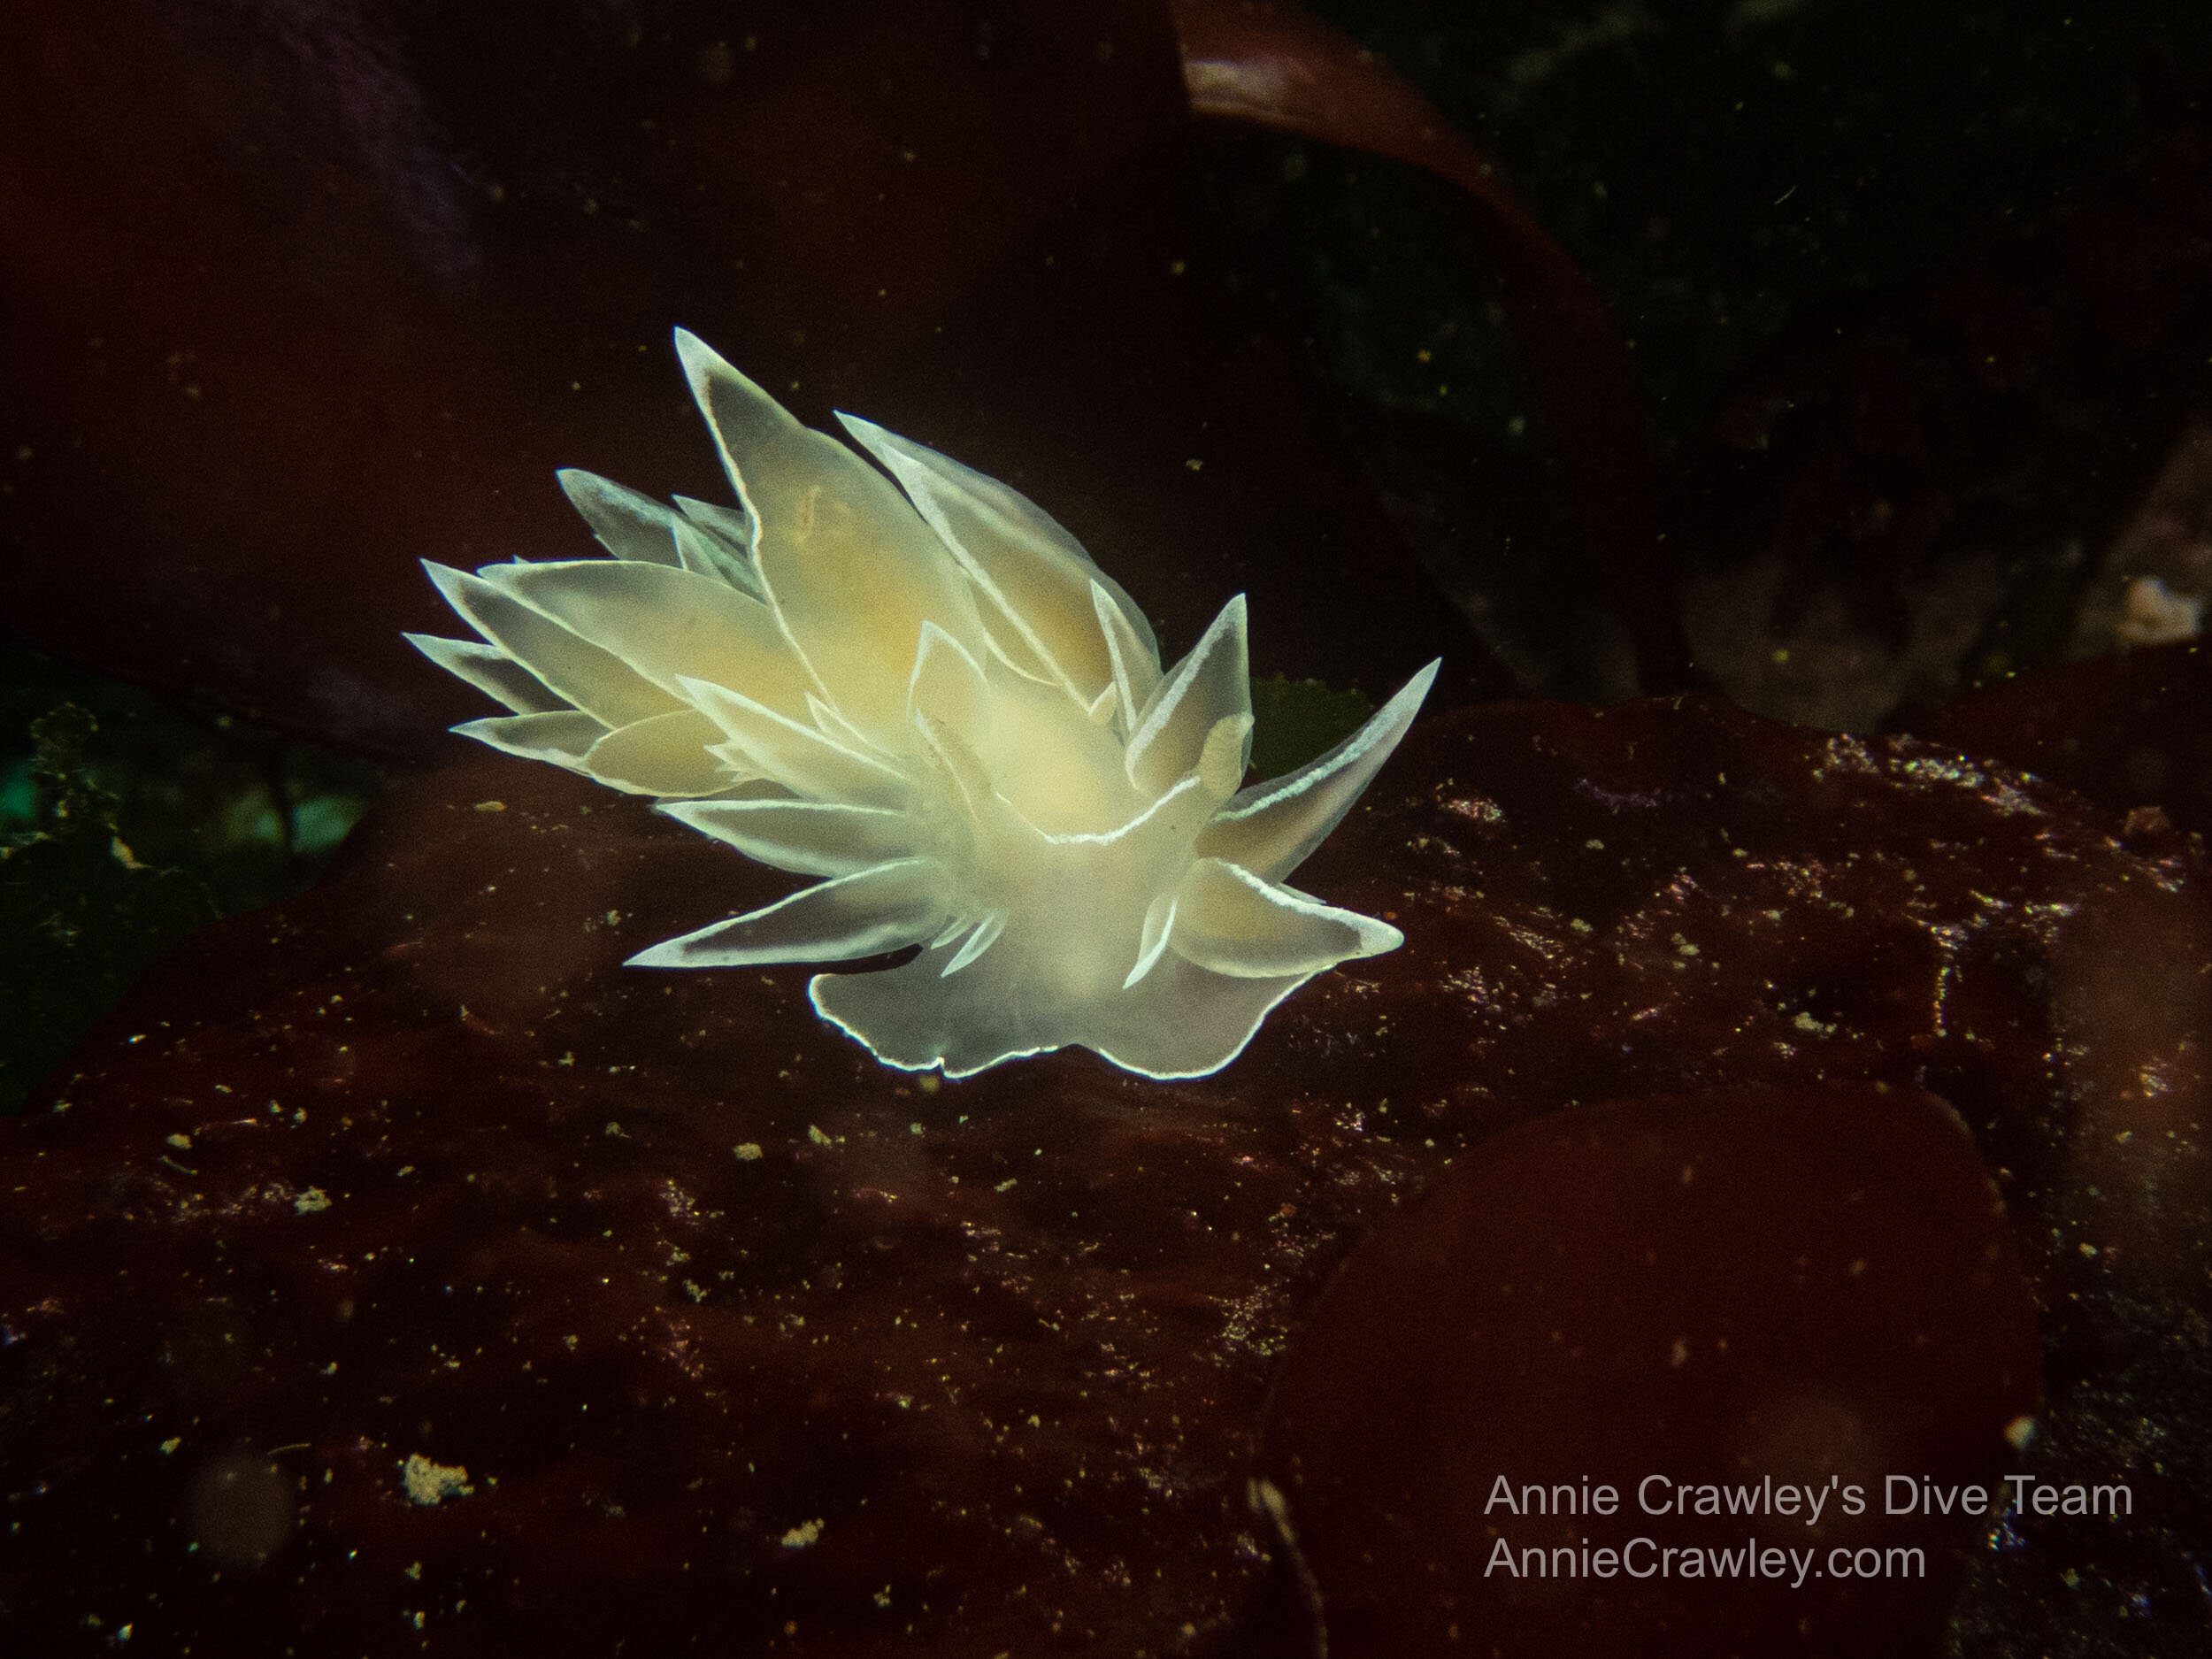  White lined dirona. Photography can be used for science or art. Photo by Elise. 